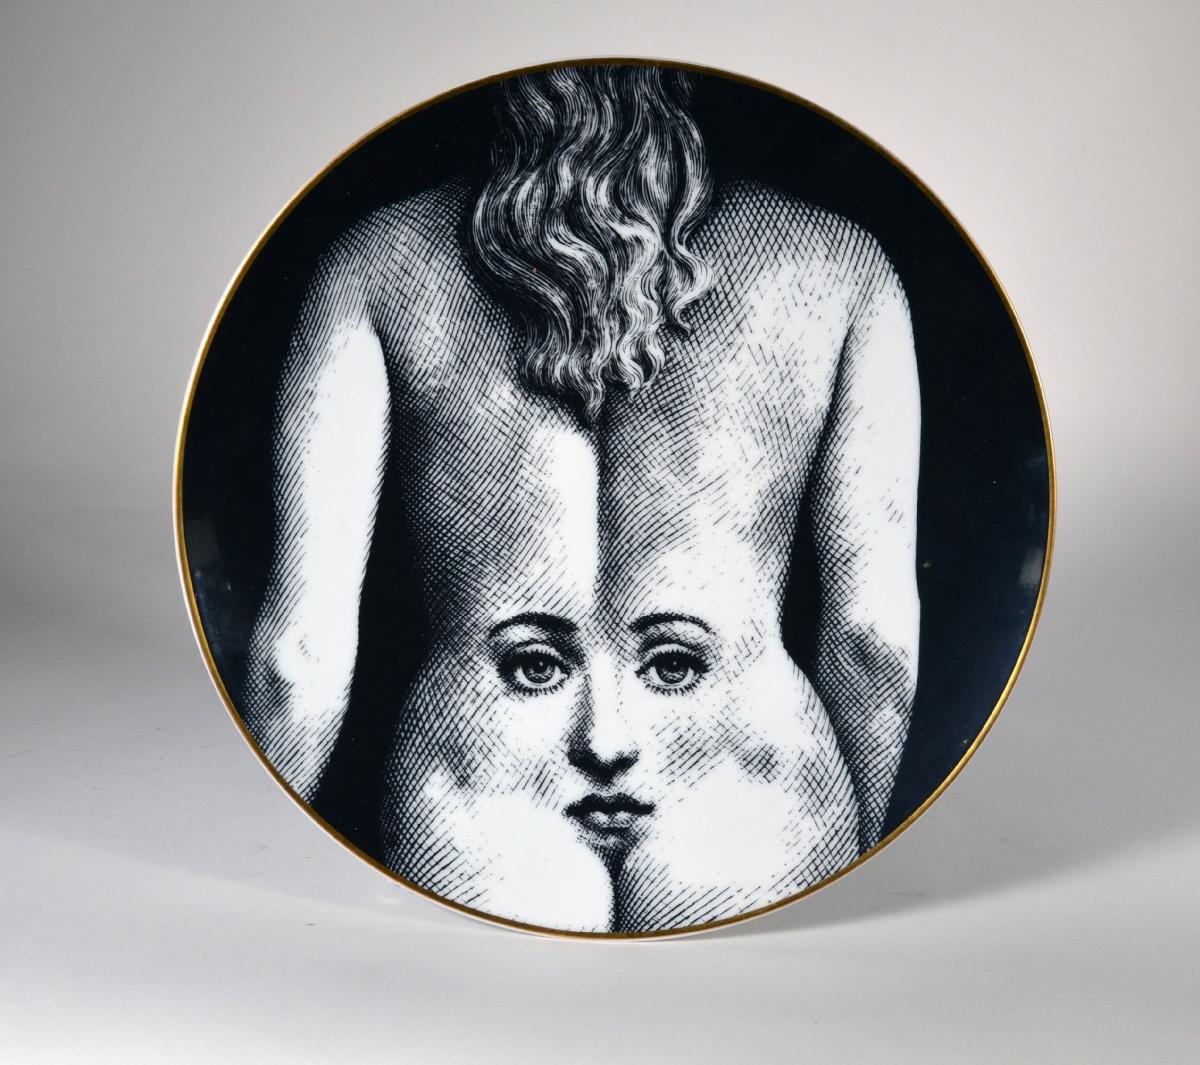 Piero Fornasetti Rosenthal Porcelain Plate, Motiv 28, Depicting the Face of  Julia on a Woman's Back, 1980s | BADA